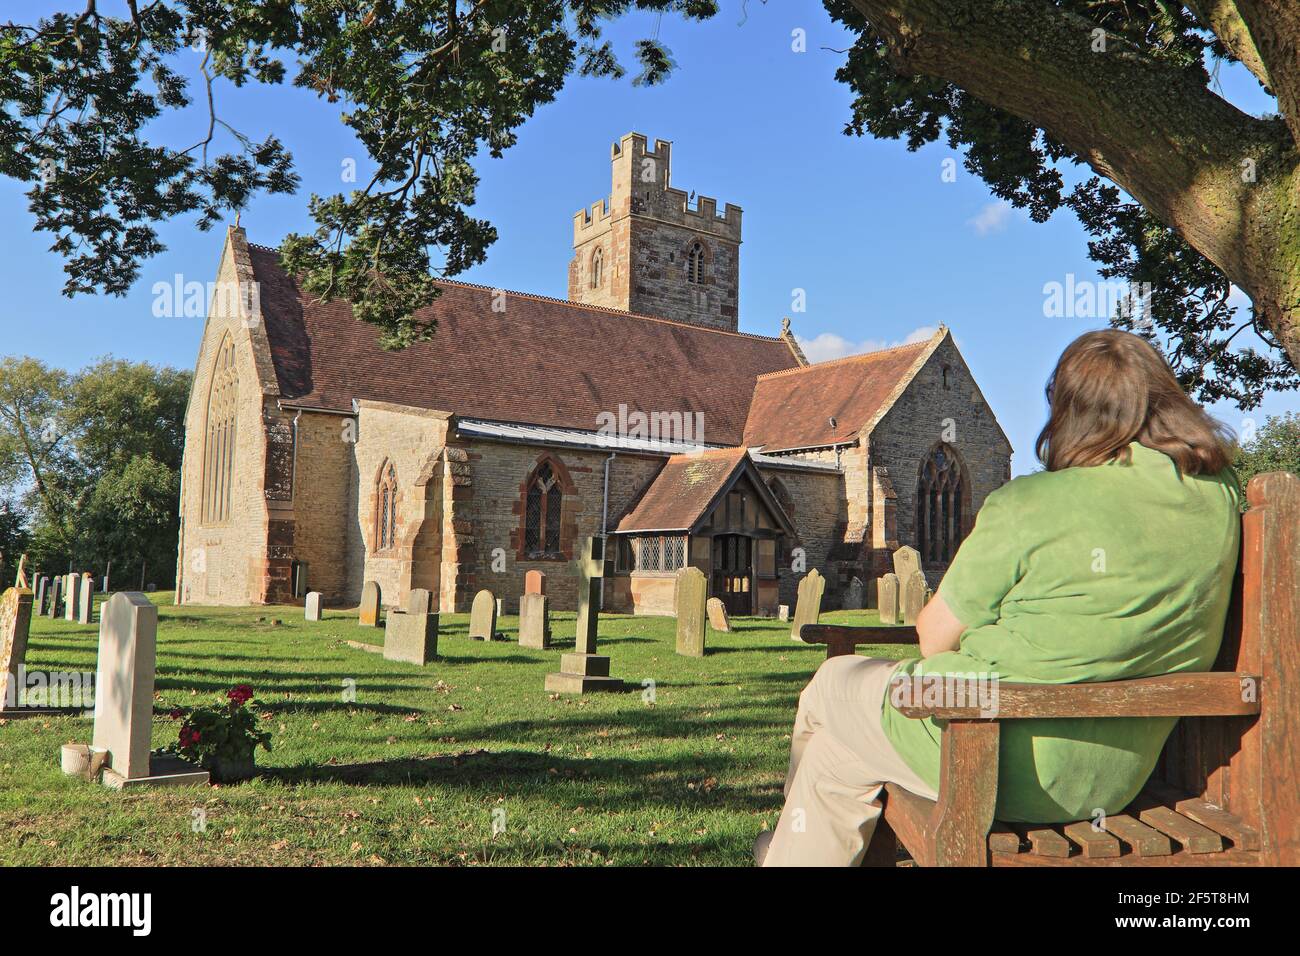 Solitude in the churchyard of St Denys' Church, Severn Stoke, Worcestershire, England, UK. Stock Photo